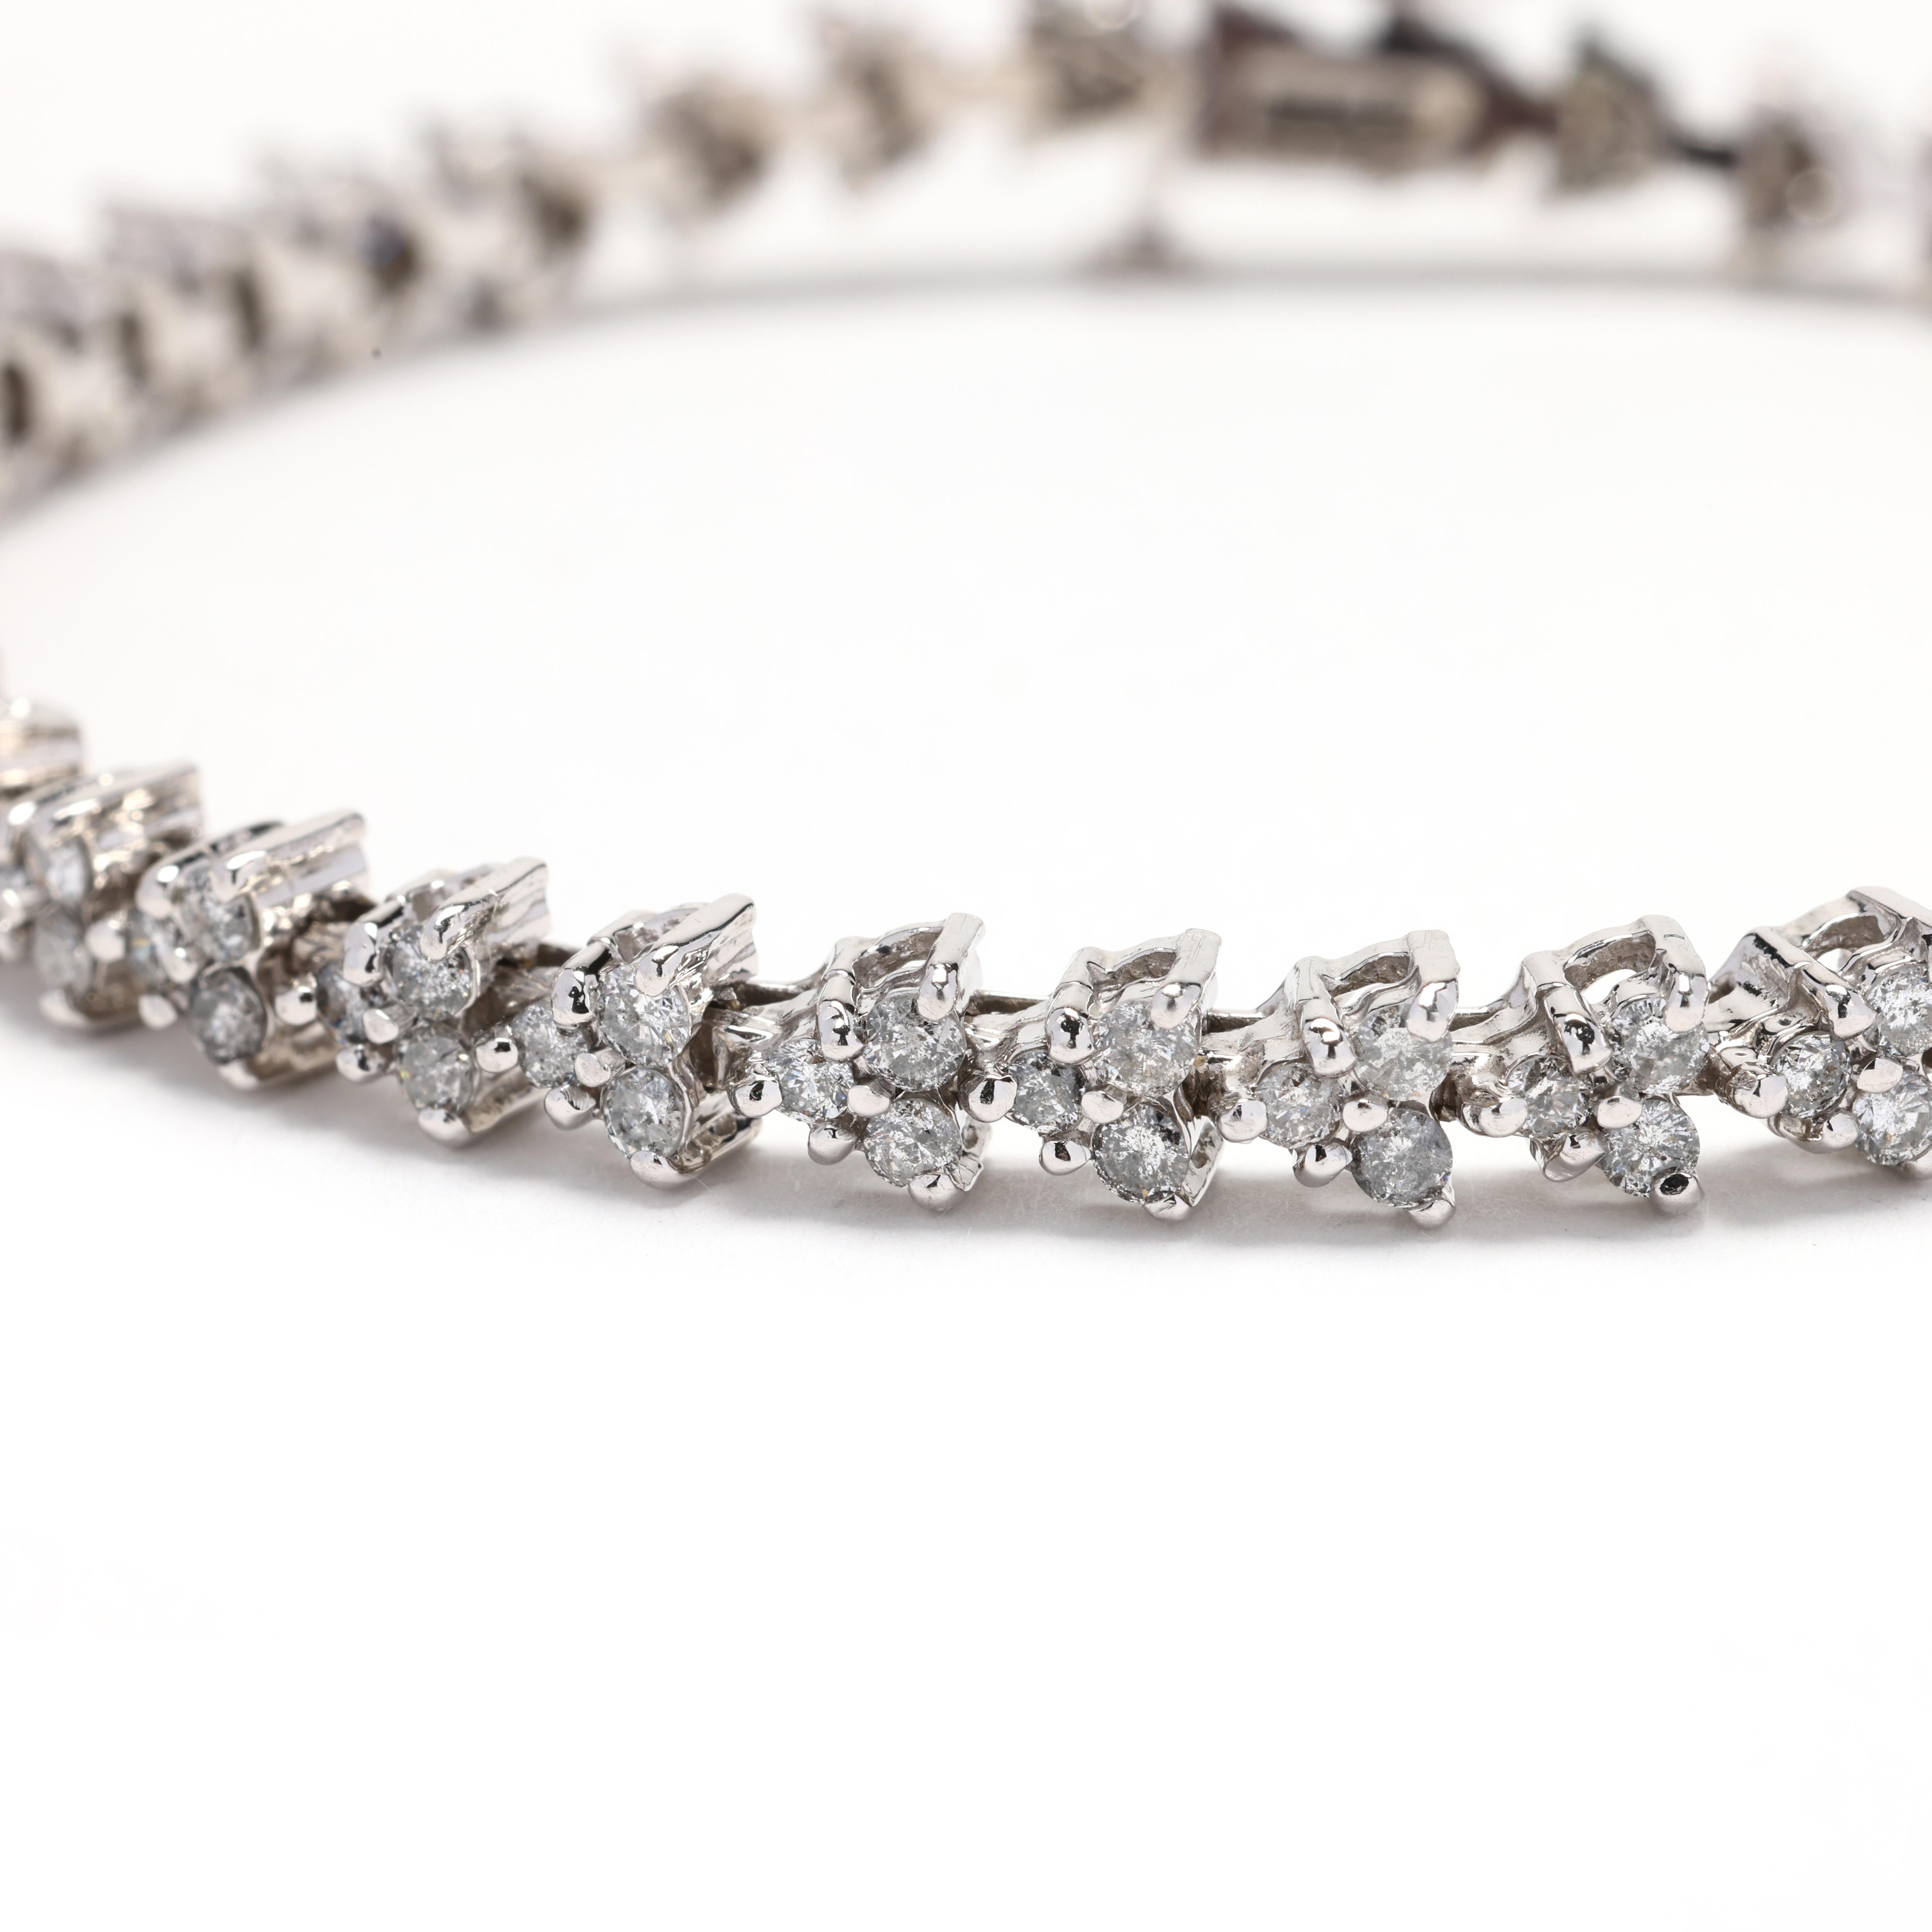 Elevate your wrist with the timeless elegance of this stunning 2.5ctw Diamond Tennis Bracelet. Expertly crafted in lustrous 14k white gold, this classic tennis bracelet features a dazzling array of round brilliant diamonds, creating a continuous